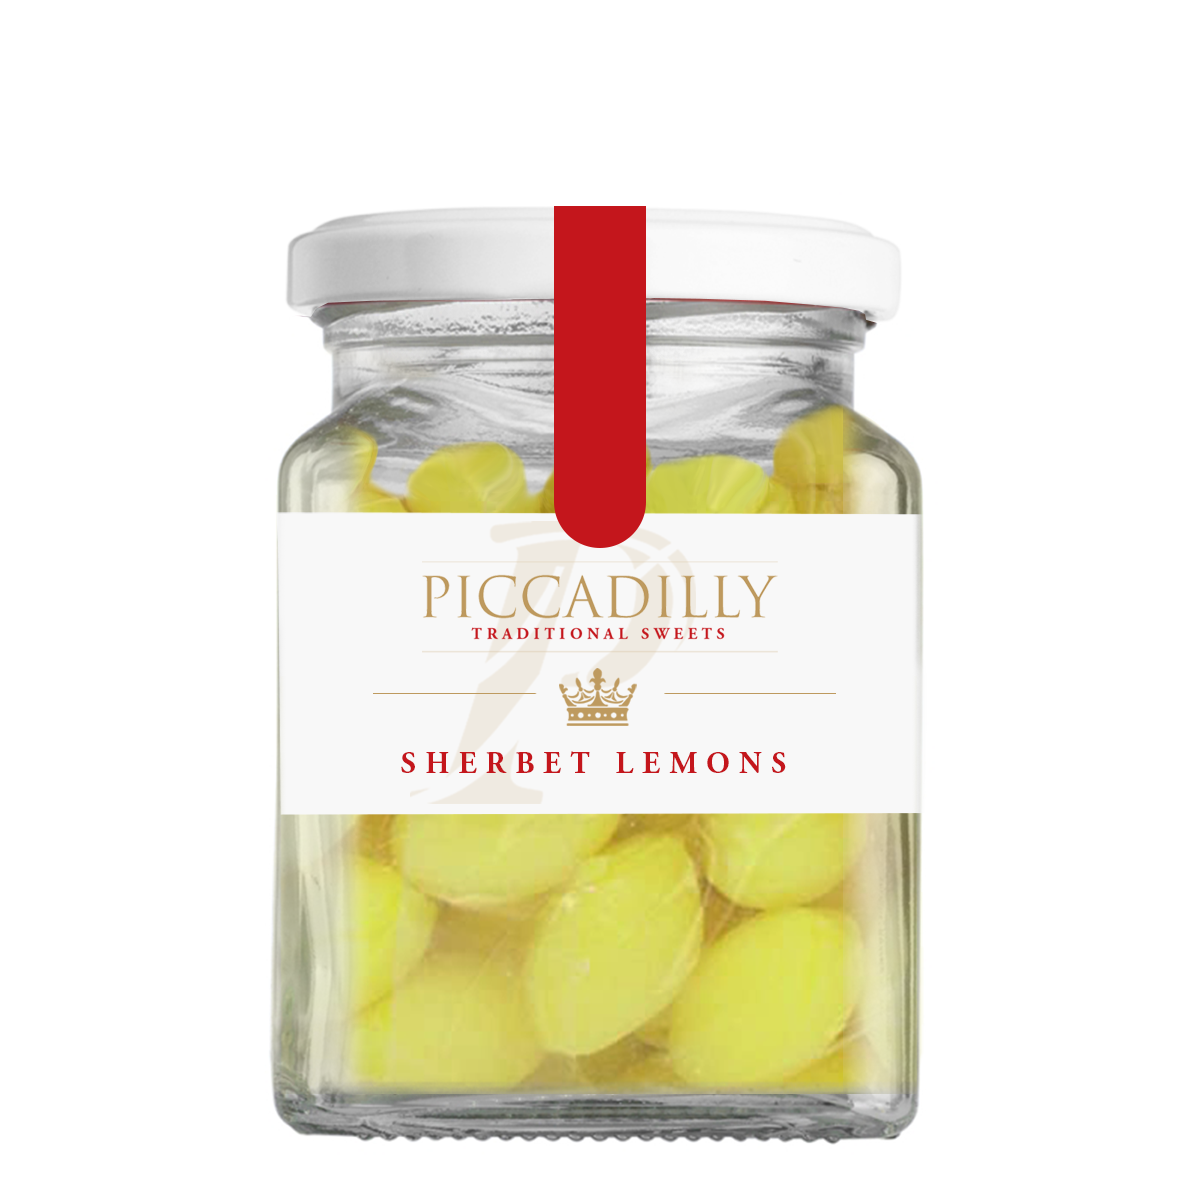 Piccadilly Traditional Sweets Sherbet Lemons 150g